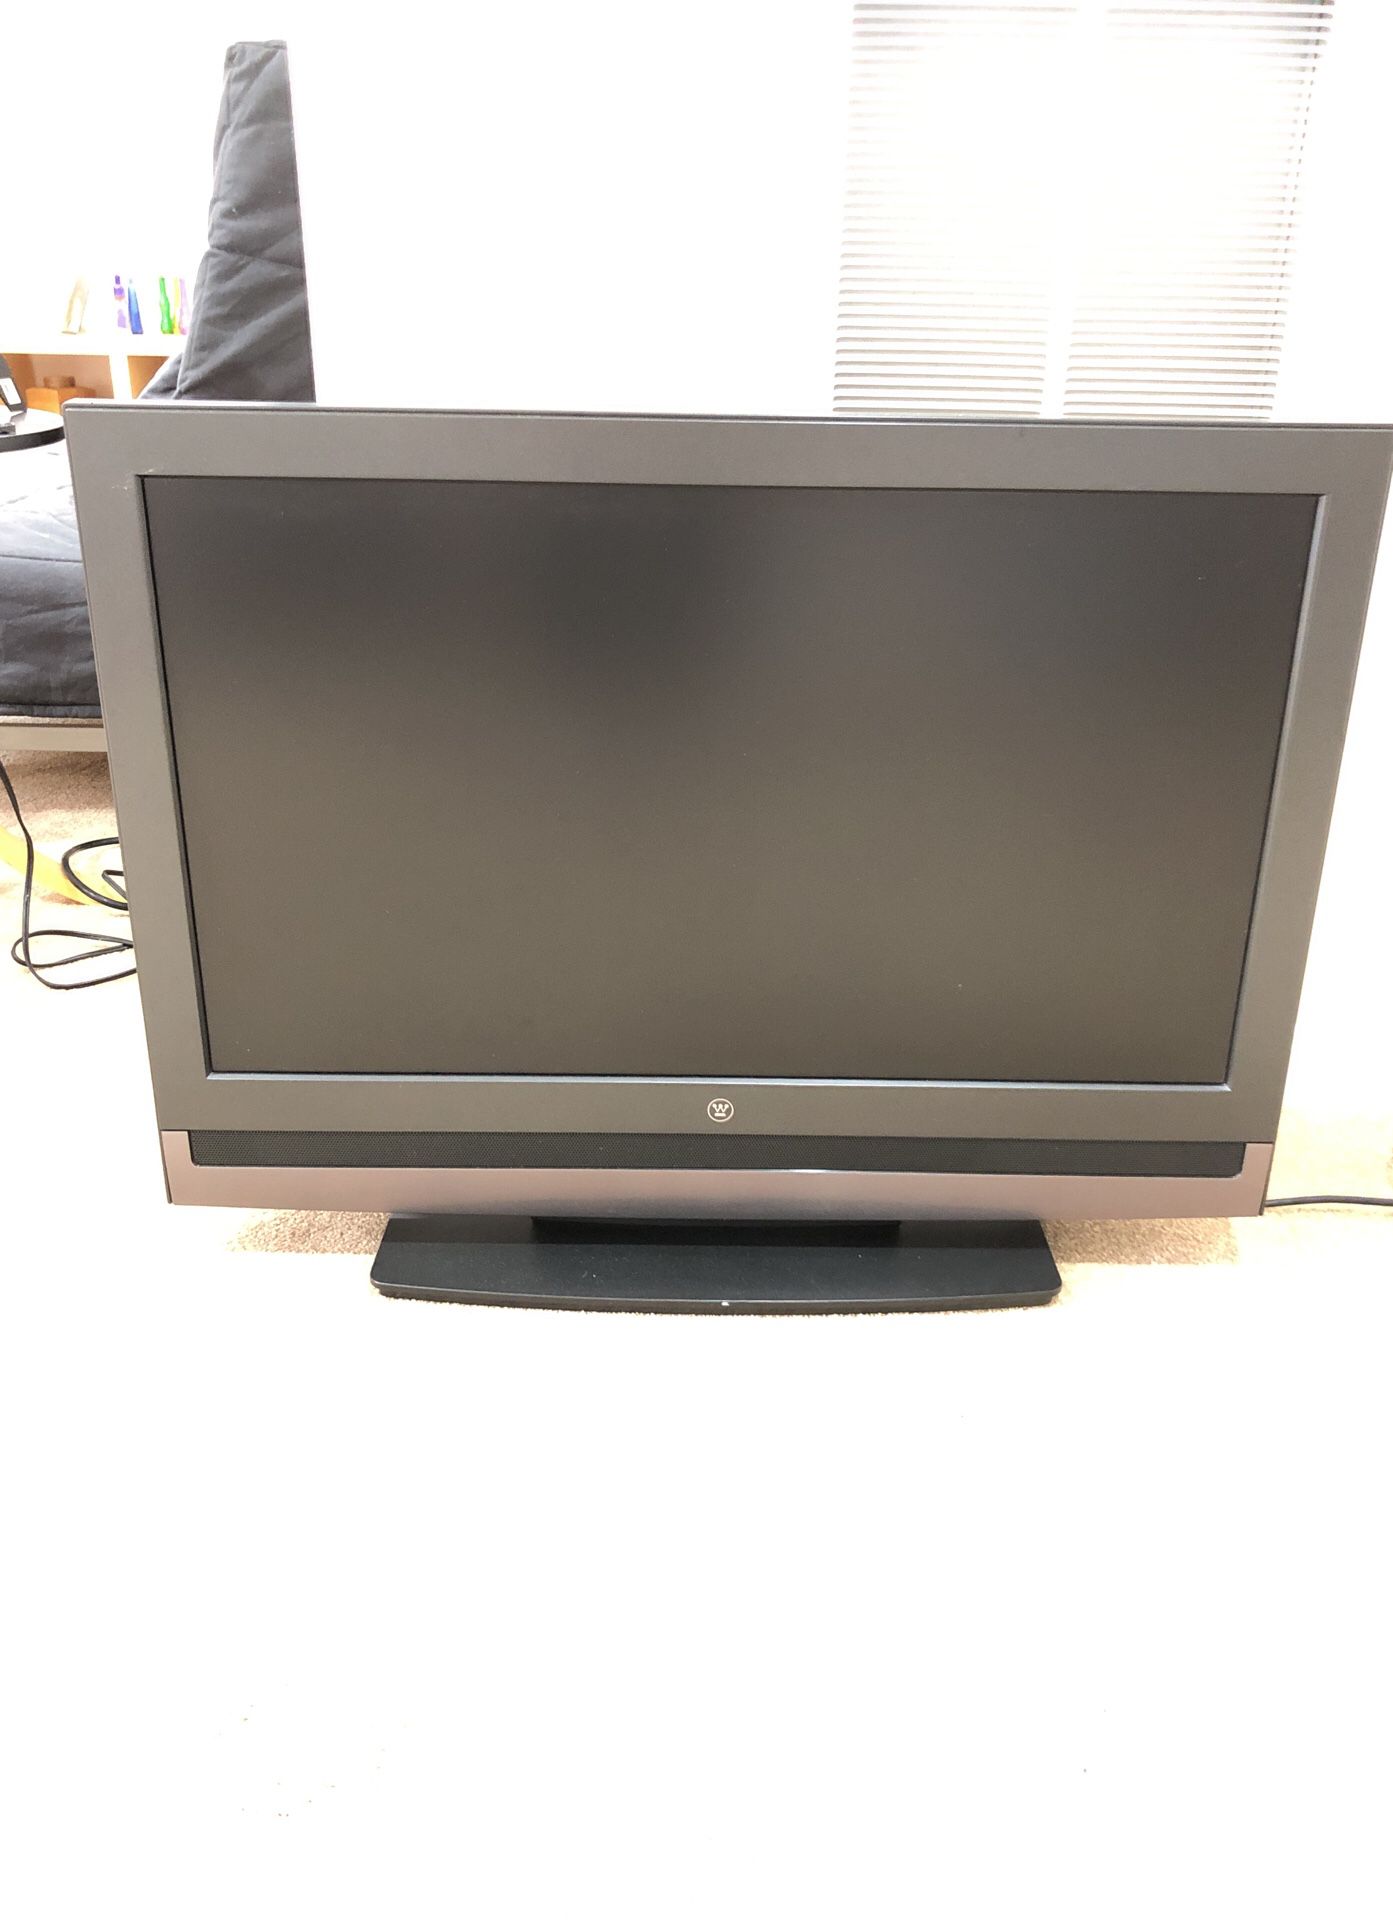 32 inch westgate LCD TV